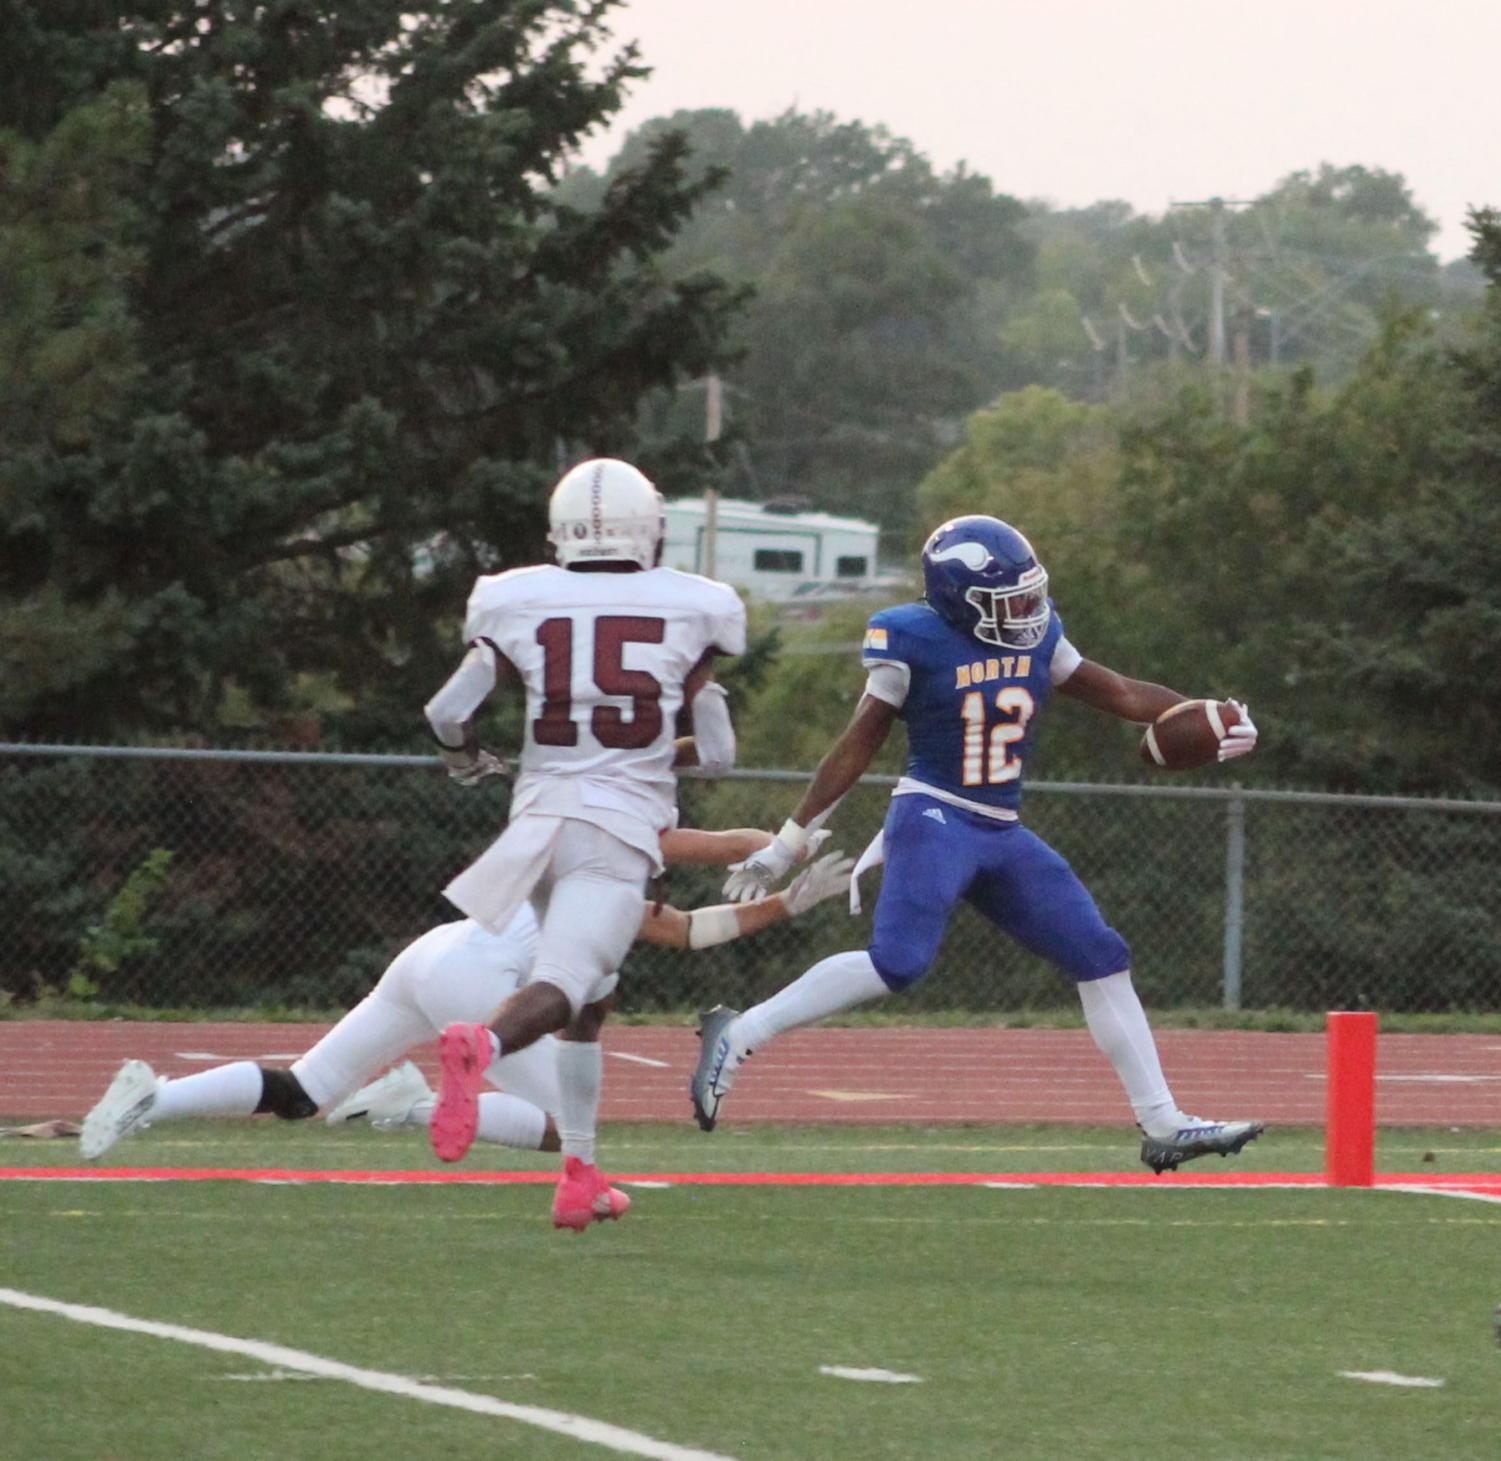 Te’Shaun Porter, 12, escapes a tckle as he runs with the ball. On September 8, 2022 the North Vikings played at Northwest high schoool against the Columbus Discoverers. The Vikings won the game with a score of 48 to 13.
PHOTO BY MA’KIYAH GAY